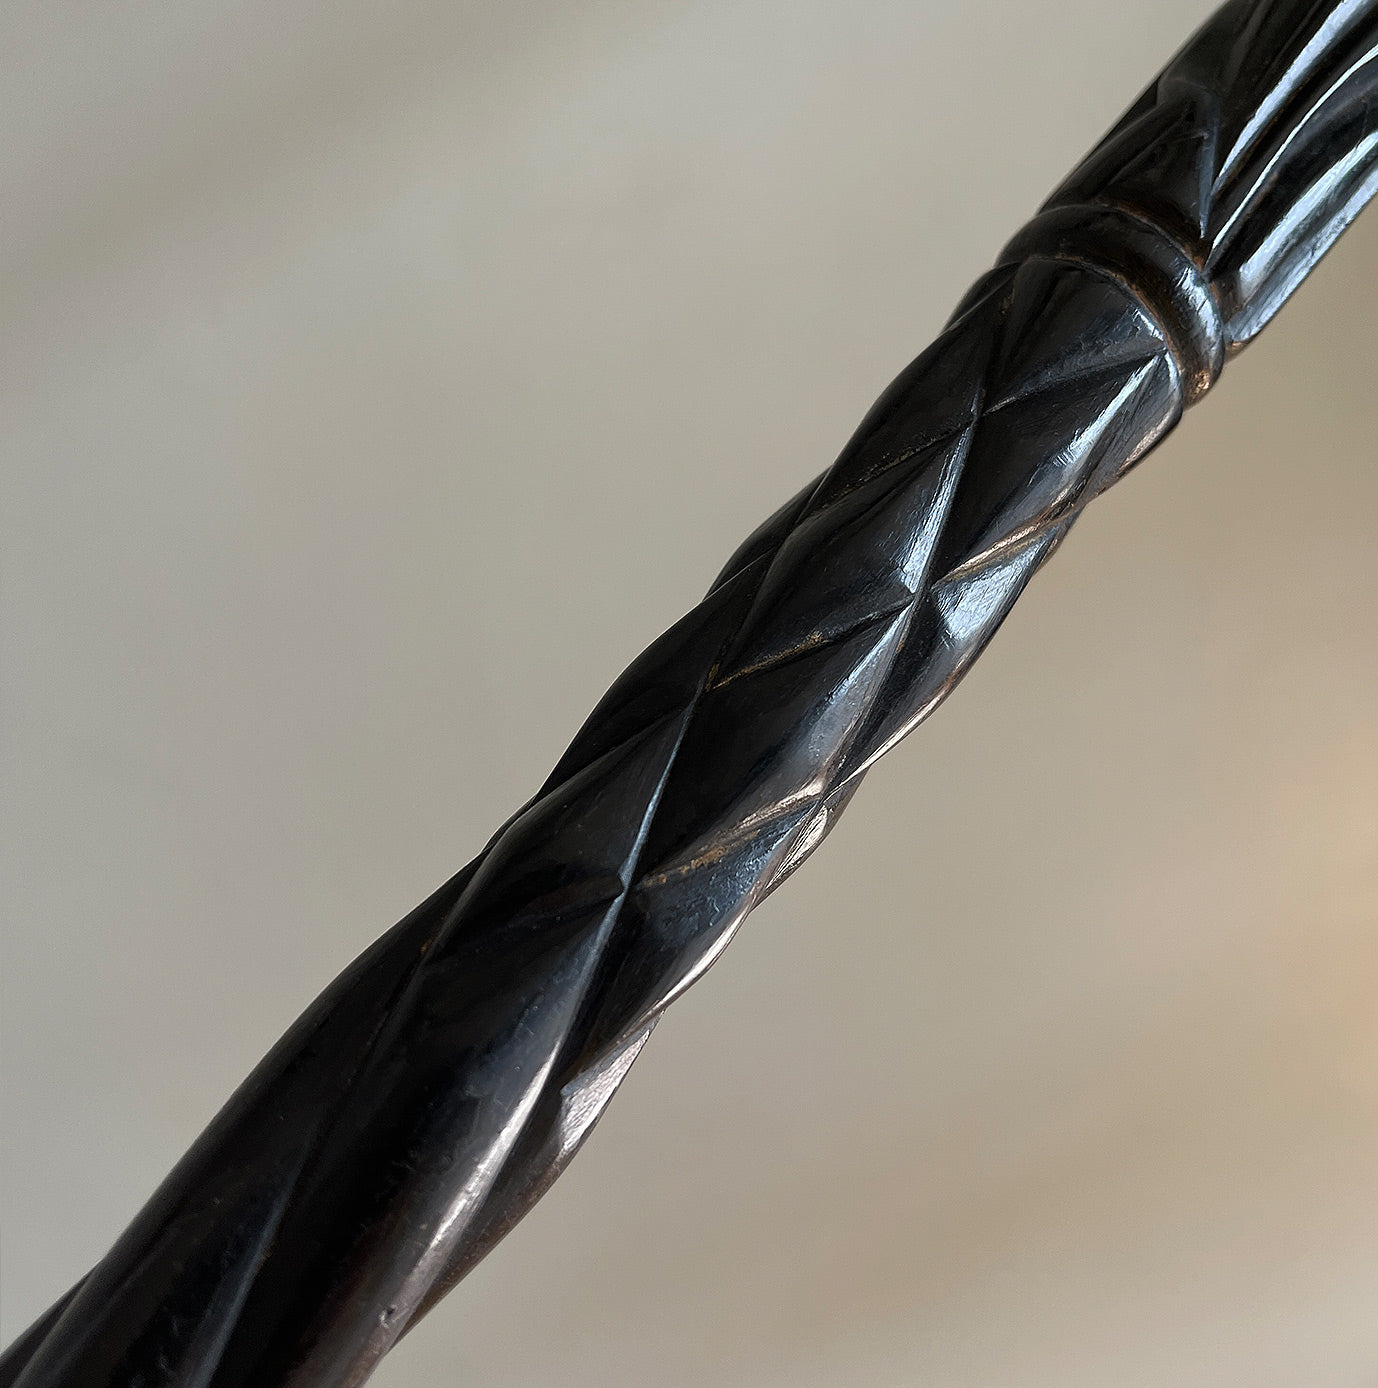 An Ebonised Elephant Walking Stick, with carved Elephant head handle and further carved detail to the shaft - SHOP NOW - www.intovintage.co.uk